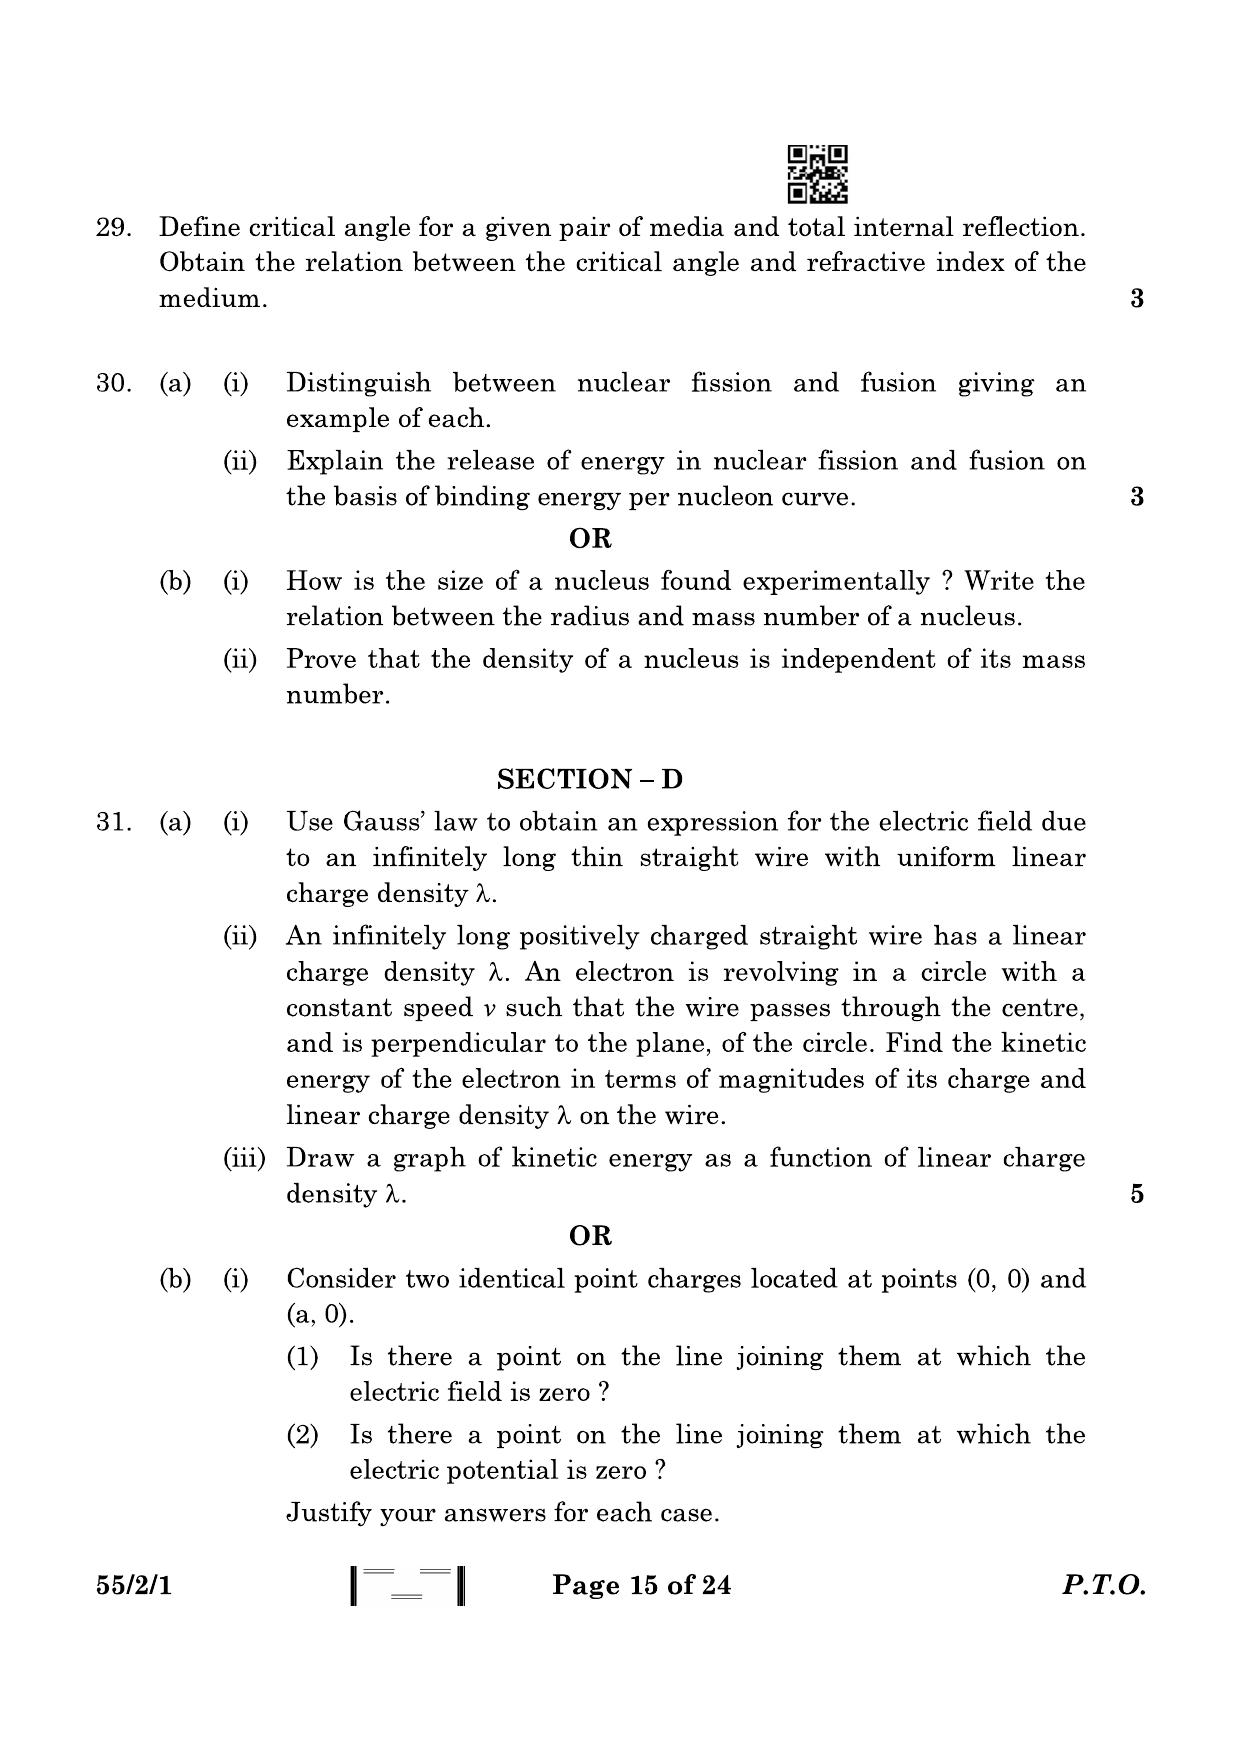 CBSE Class 12 55-2-1 Physics 2023 Question Paper - Page 15